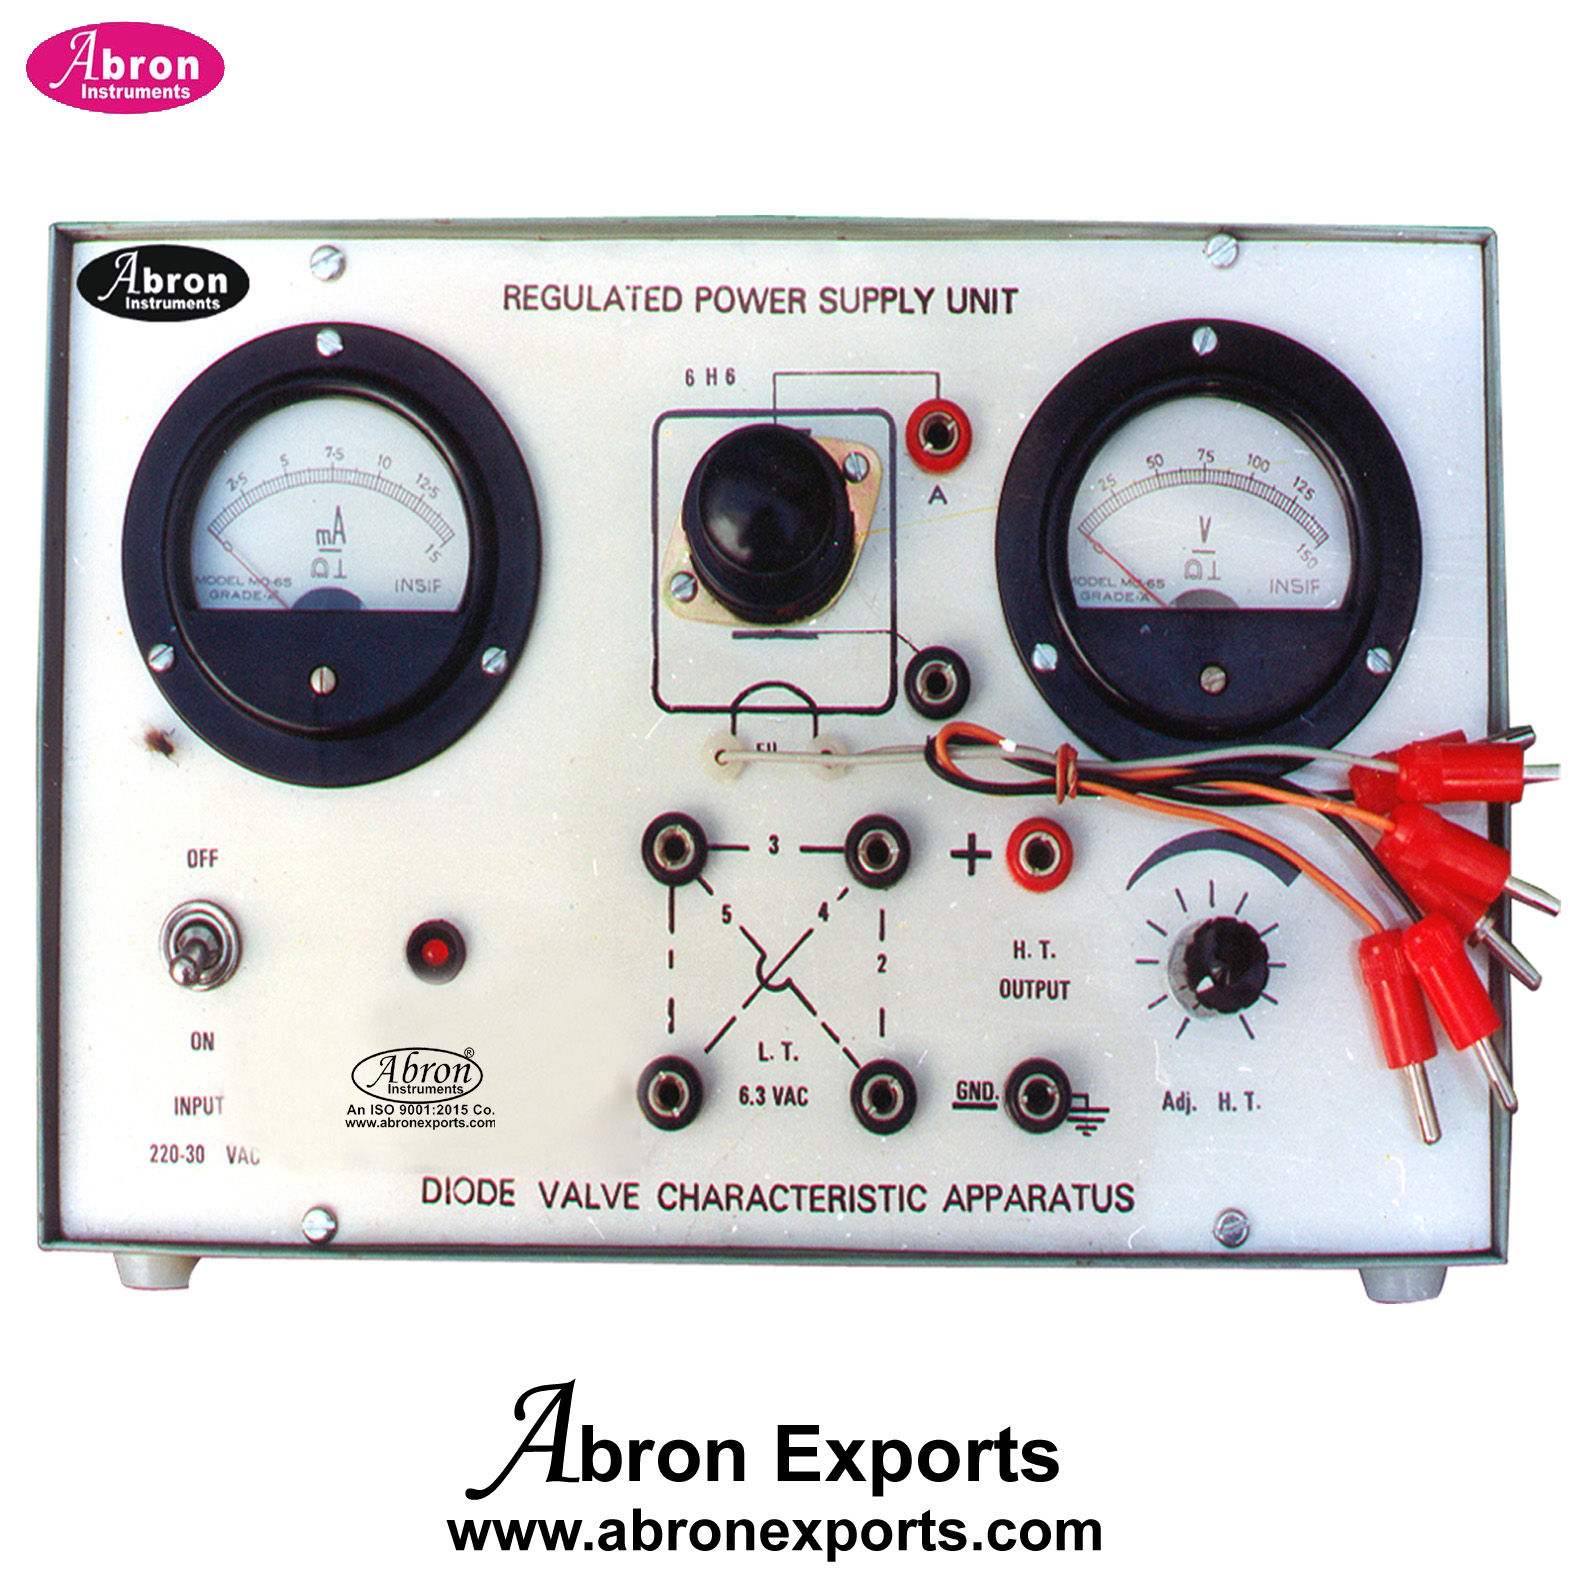 To Study Deflection Efficiency of Diode Valve 2 Meter 250V LT 6.3V AC Power Supply Abron AE-1254E 